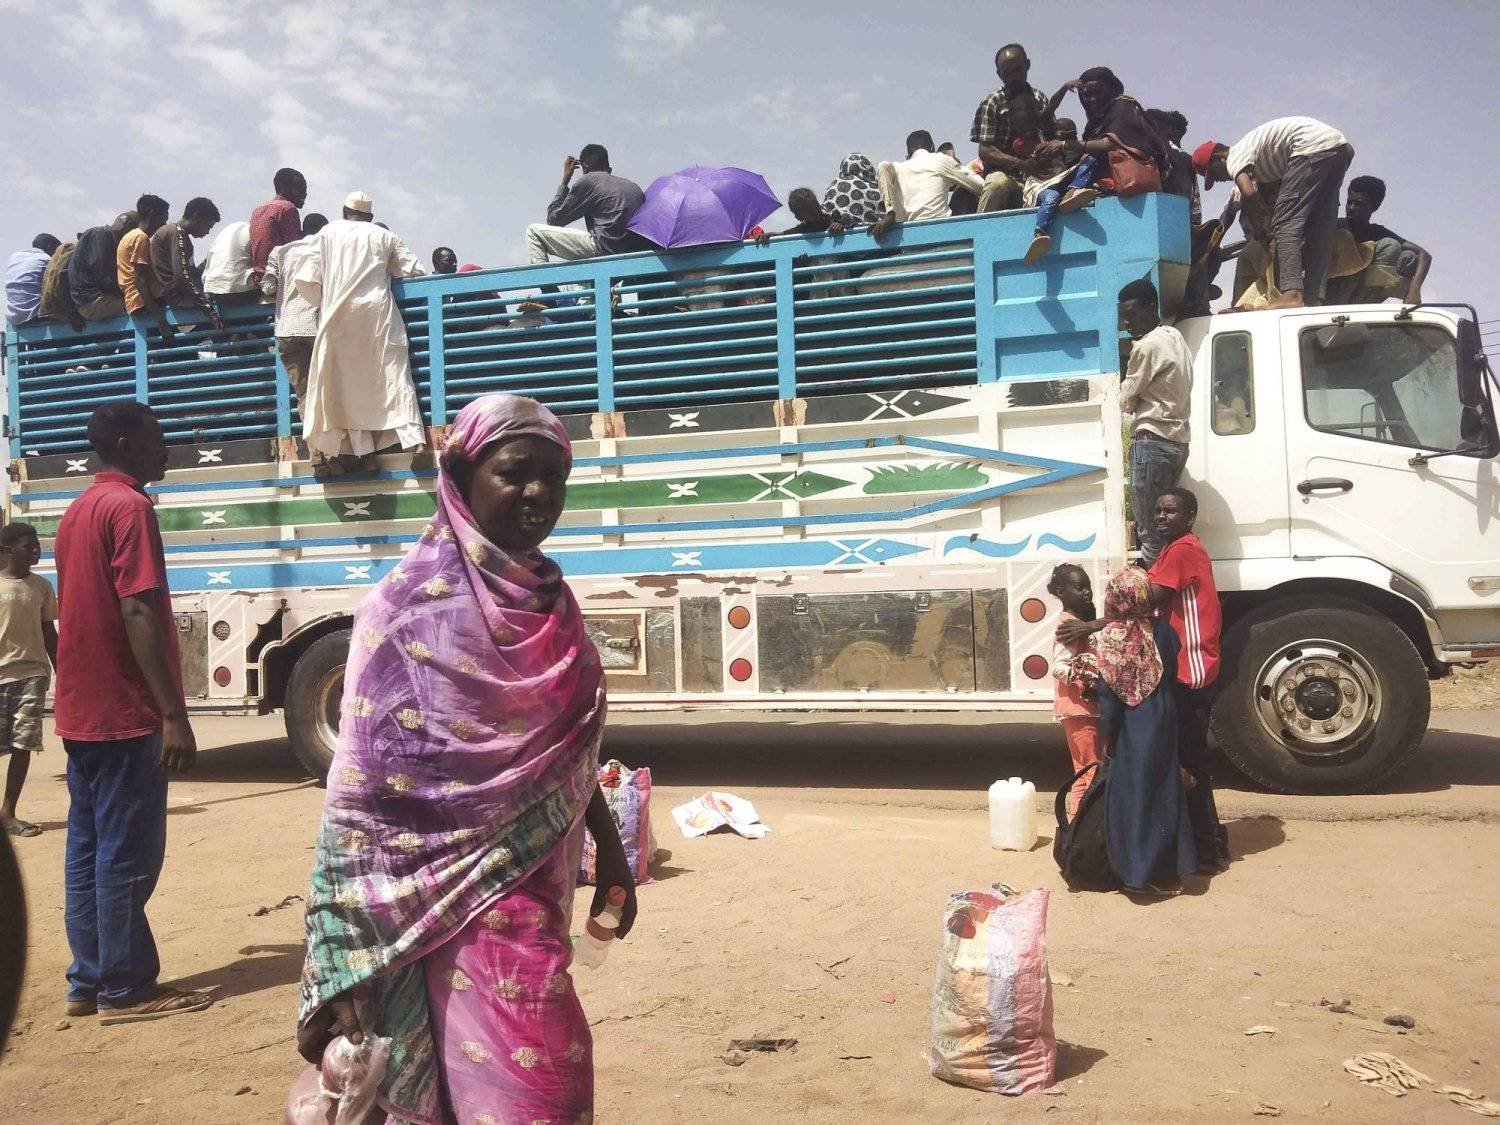 People are seen getting on a bus to leave Khartoum, Sudan. (AP)